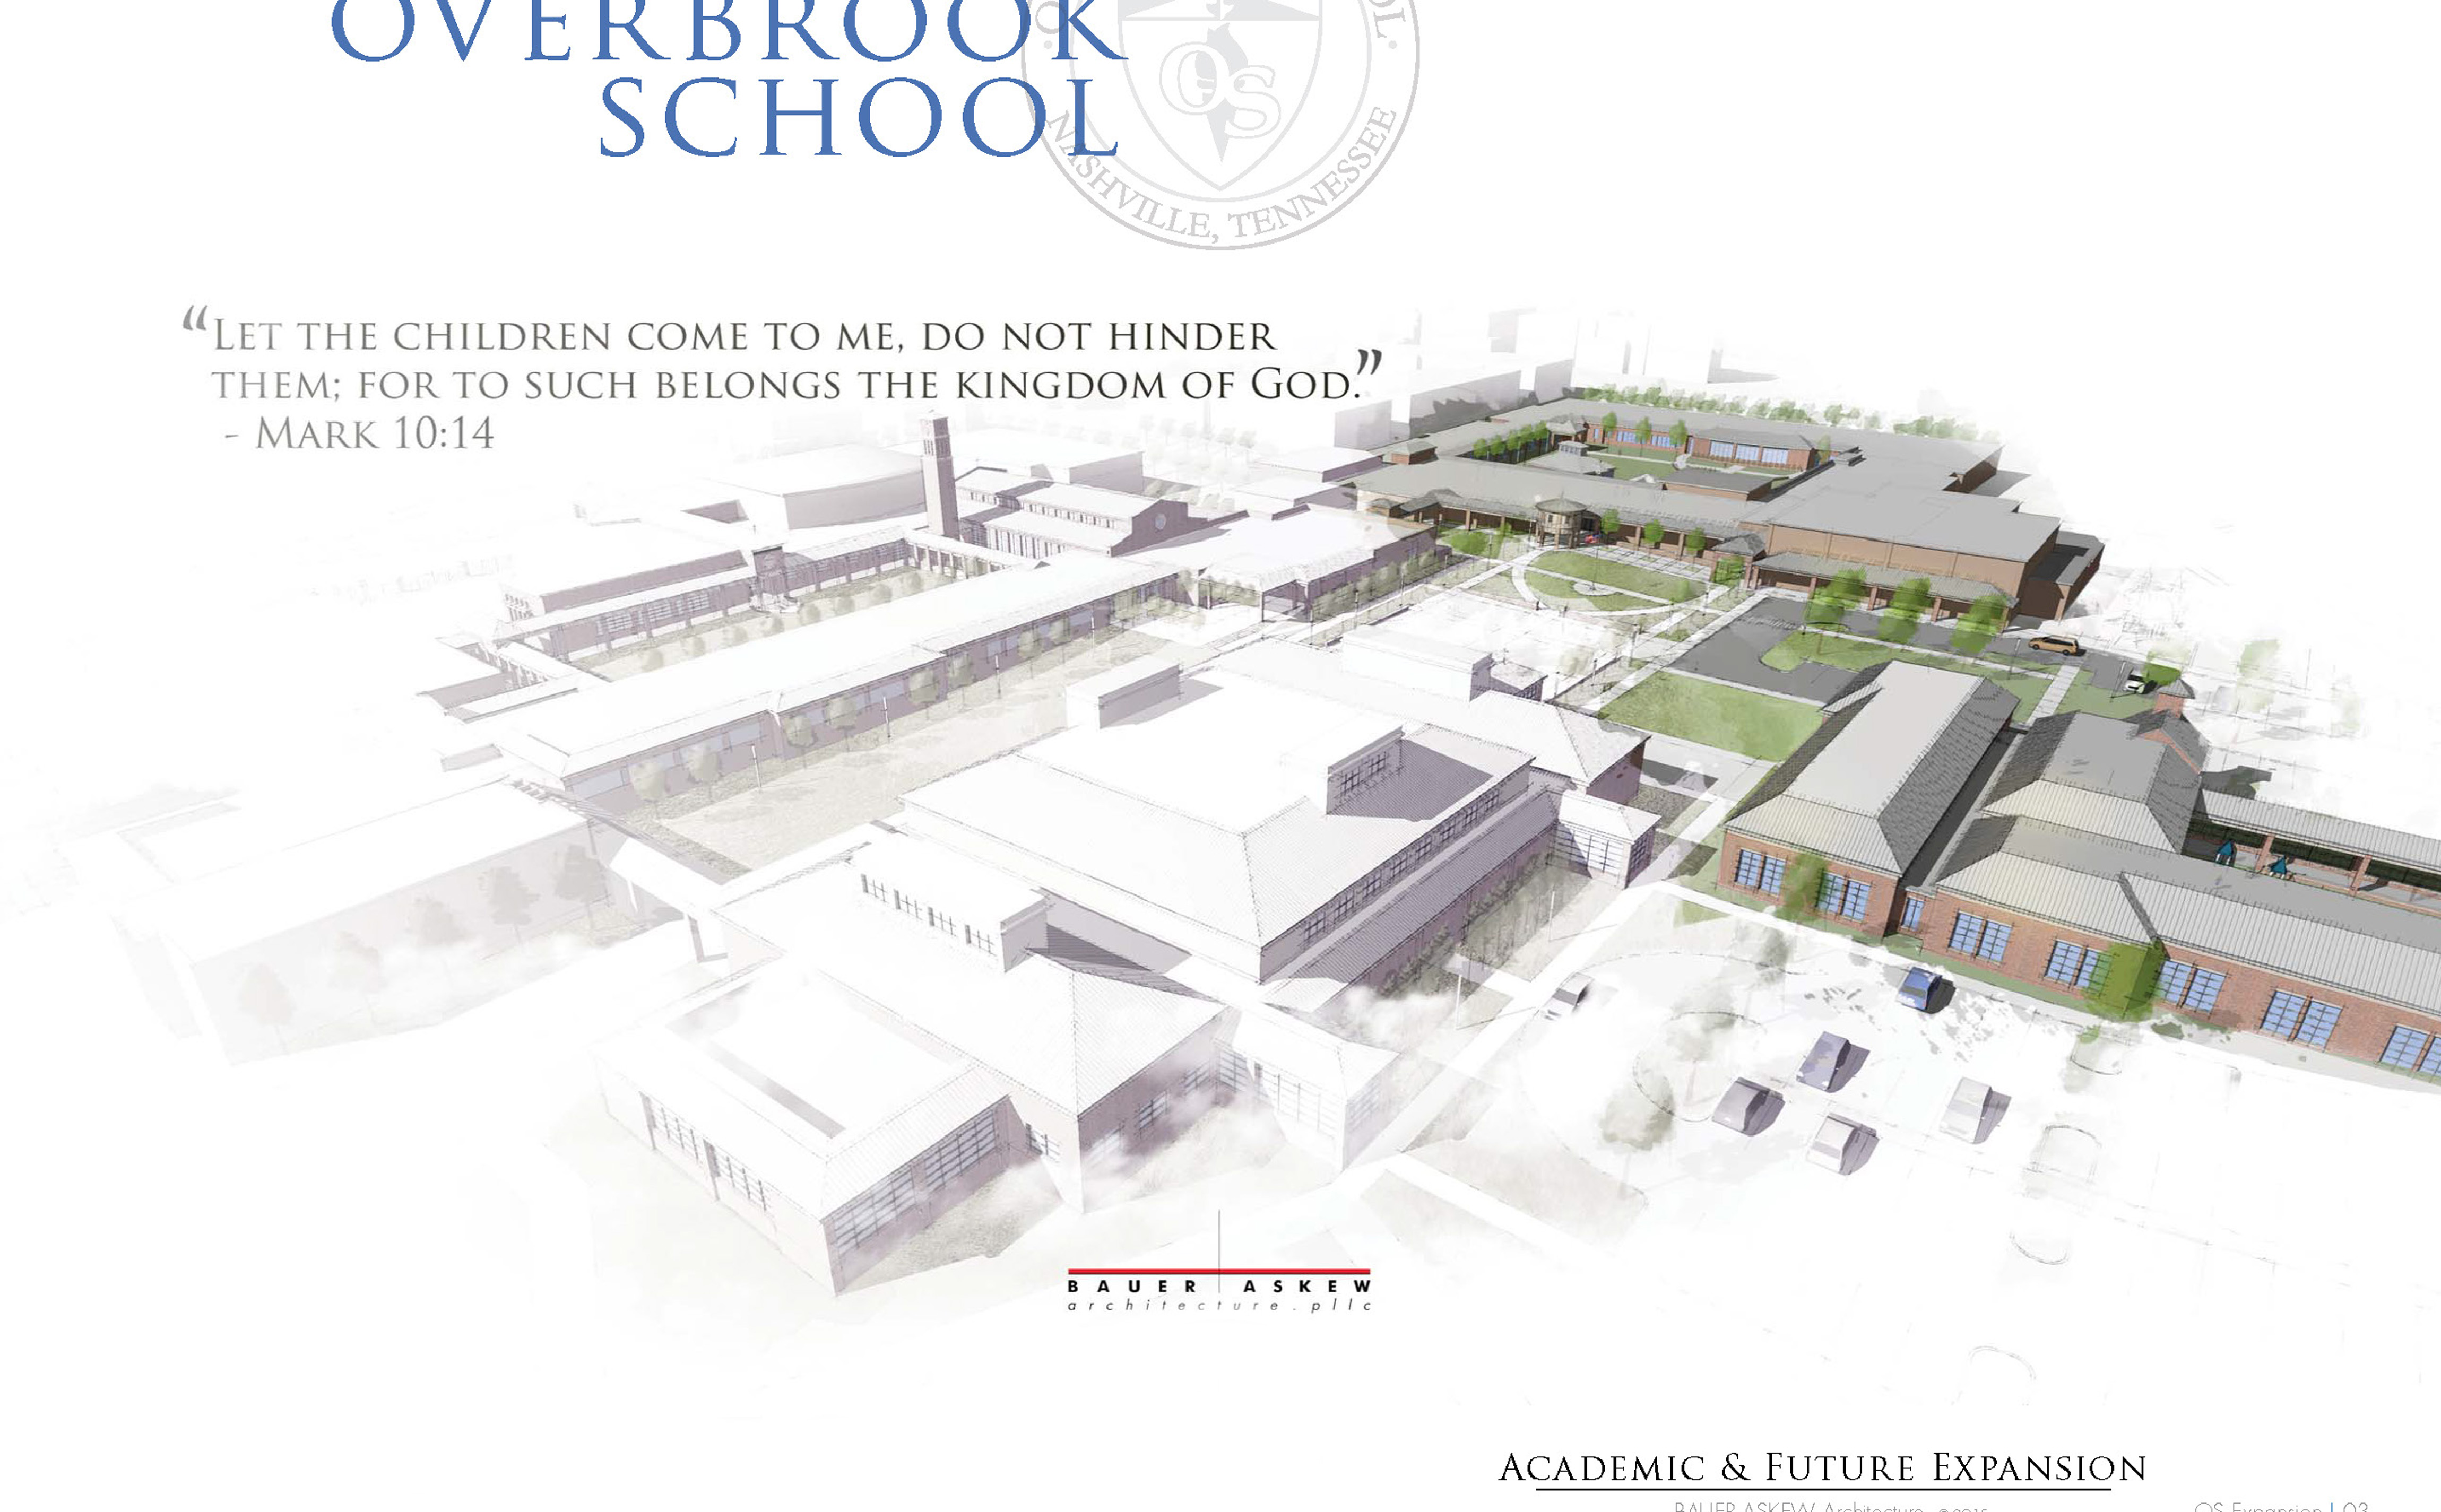 master plan, overbrook, school, nashville, tennessee, architecture, design, watercolor